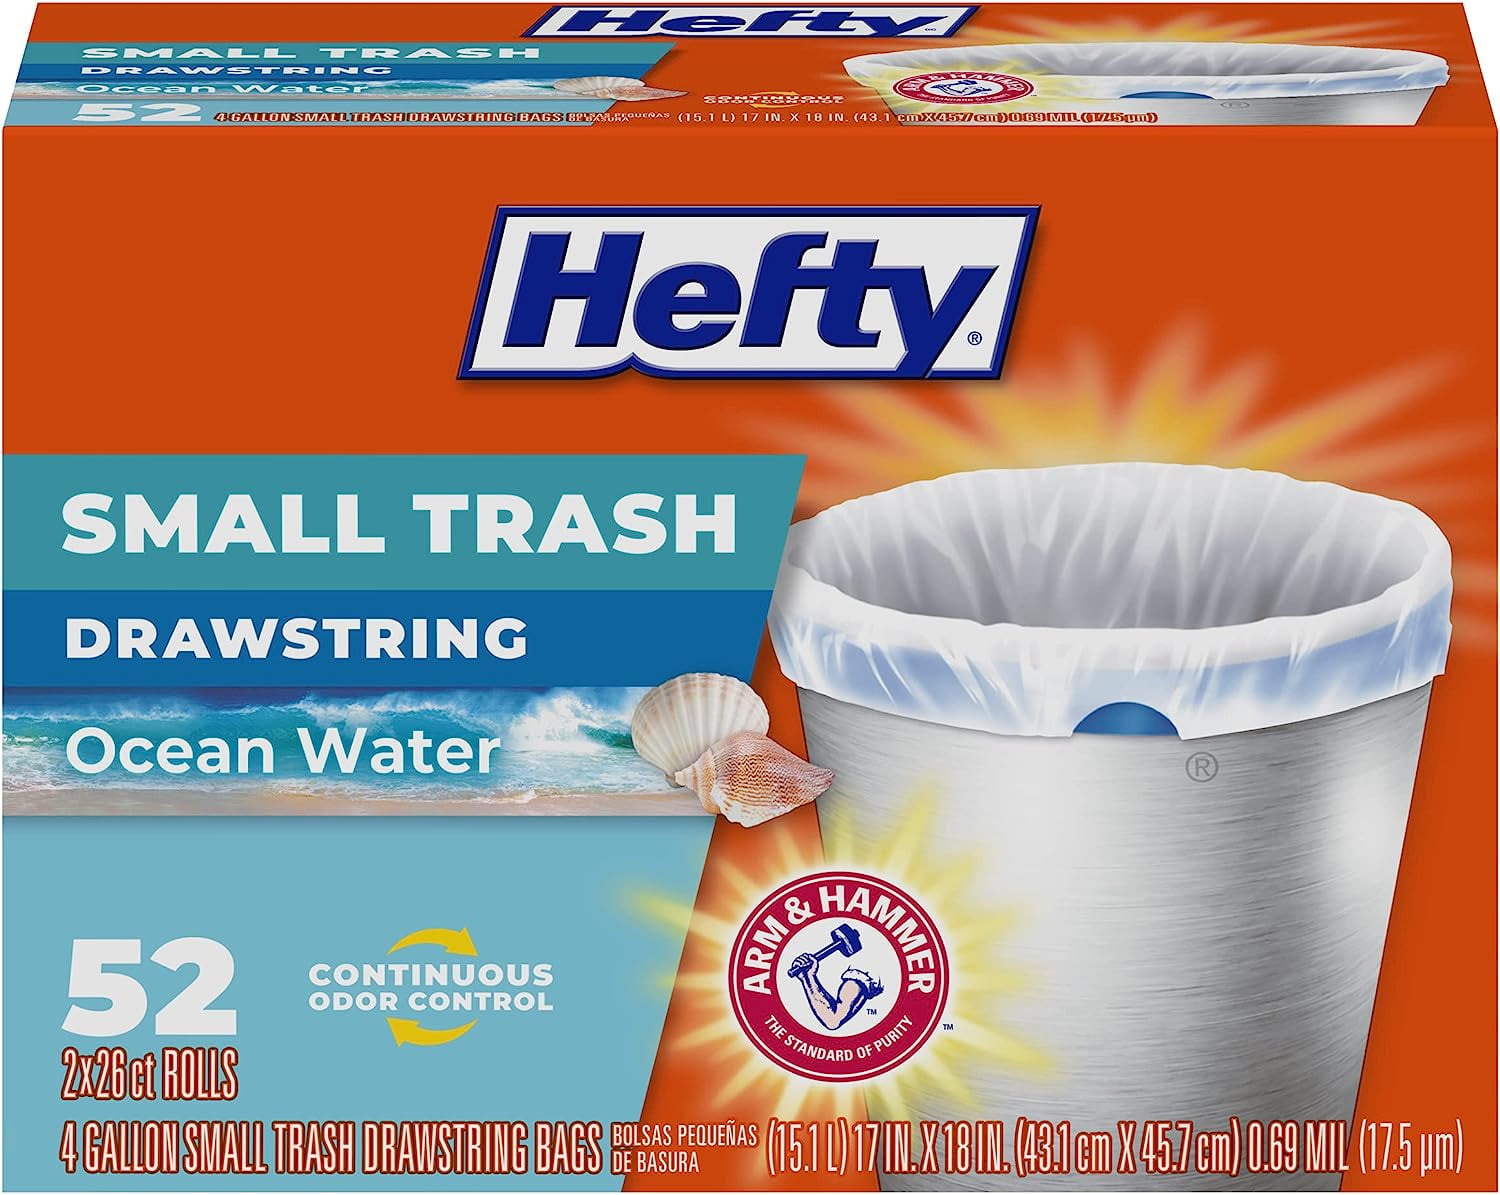 Hefty Small Trash Bags, Ocean Water Scent, 4 Gallon, 52 Count 